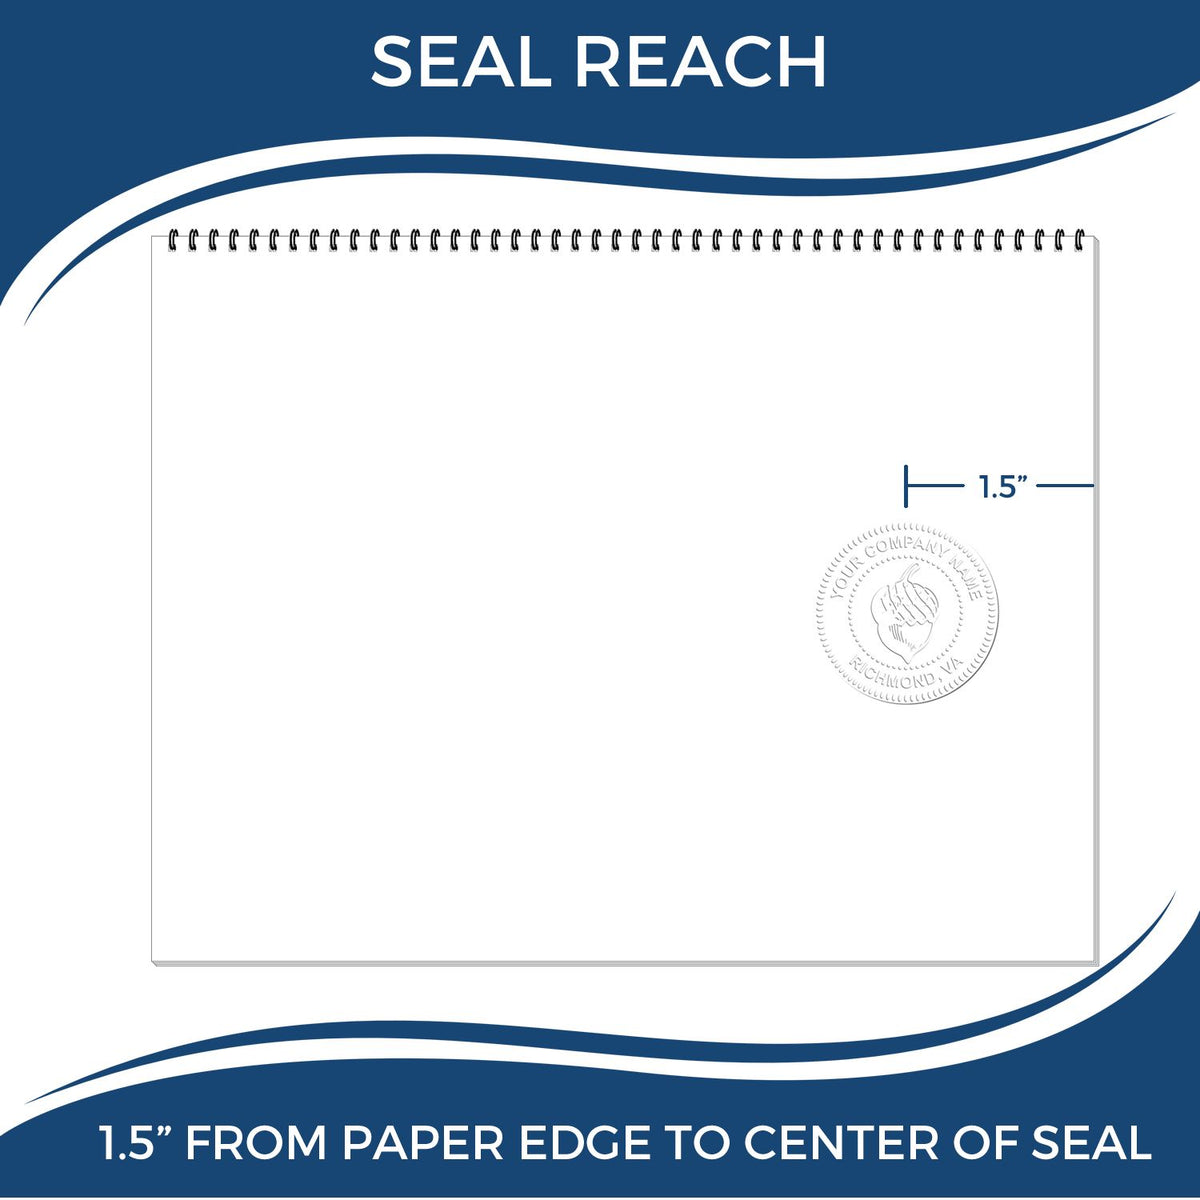 An infographic showing the seal reach which is represented by a ruler and a miniature seal image of the Handheld Idaho Professional Geologist Embosser